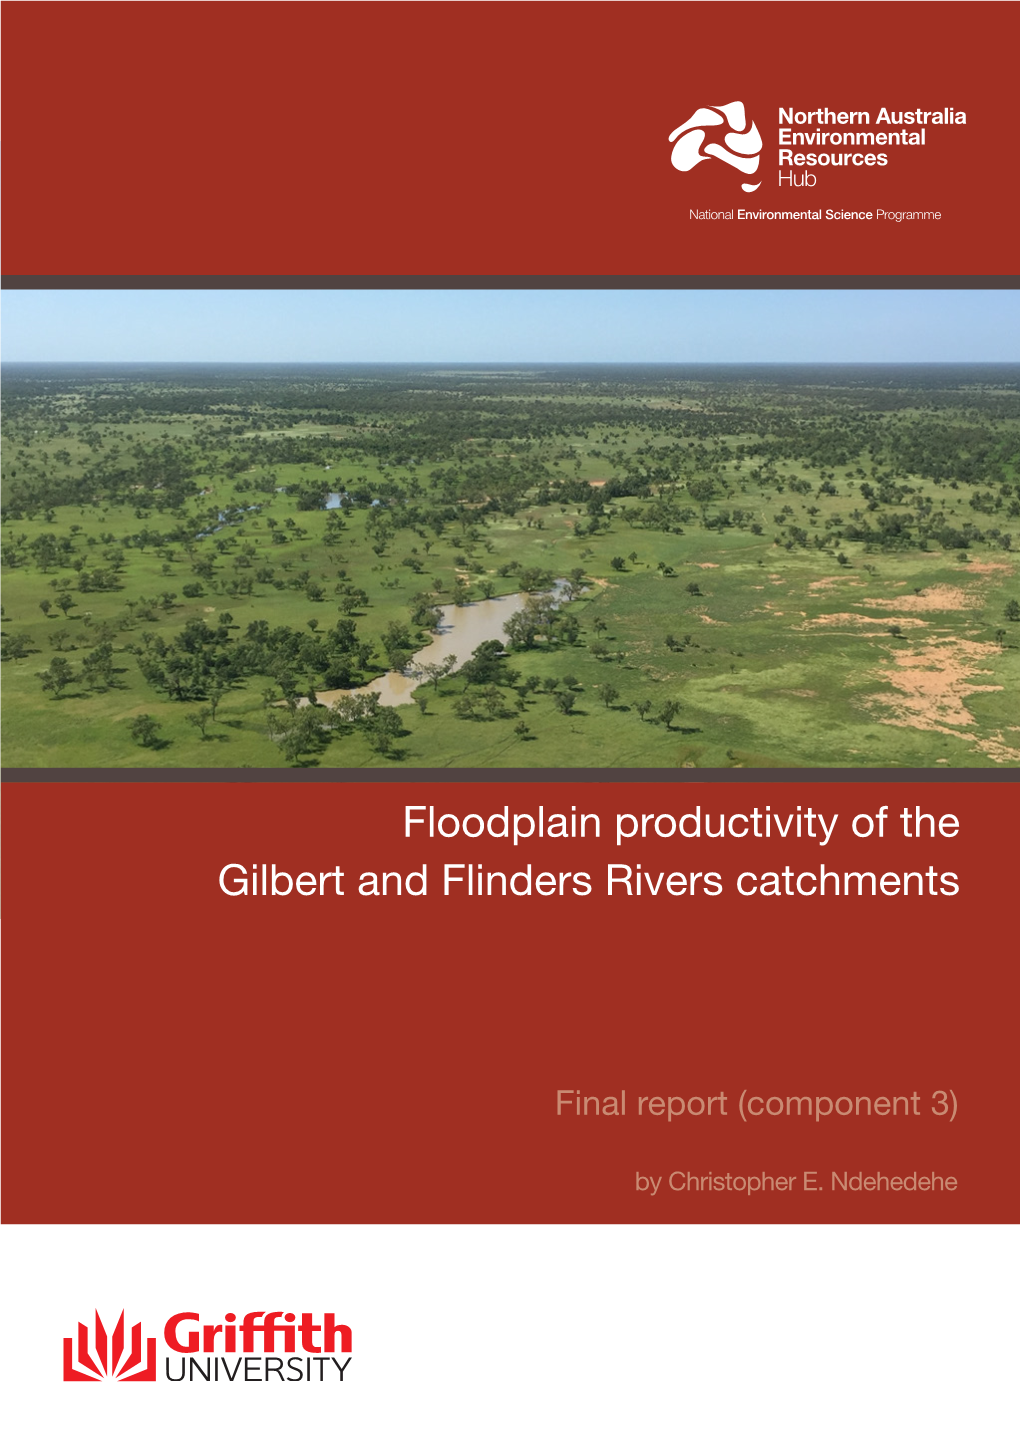 Floodplain Productivity of the Gilbert and Flinders Rivers Catchments